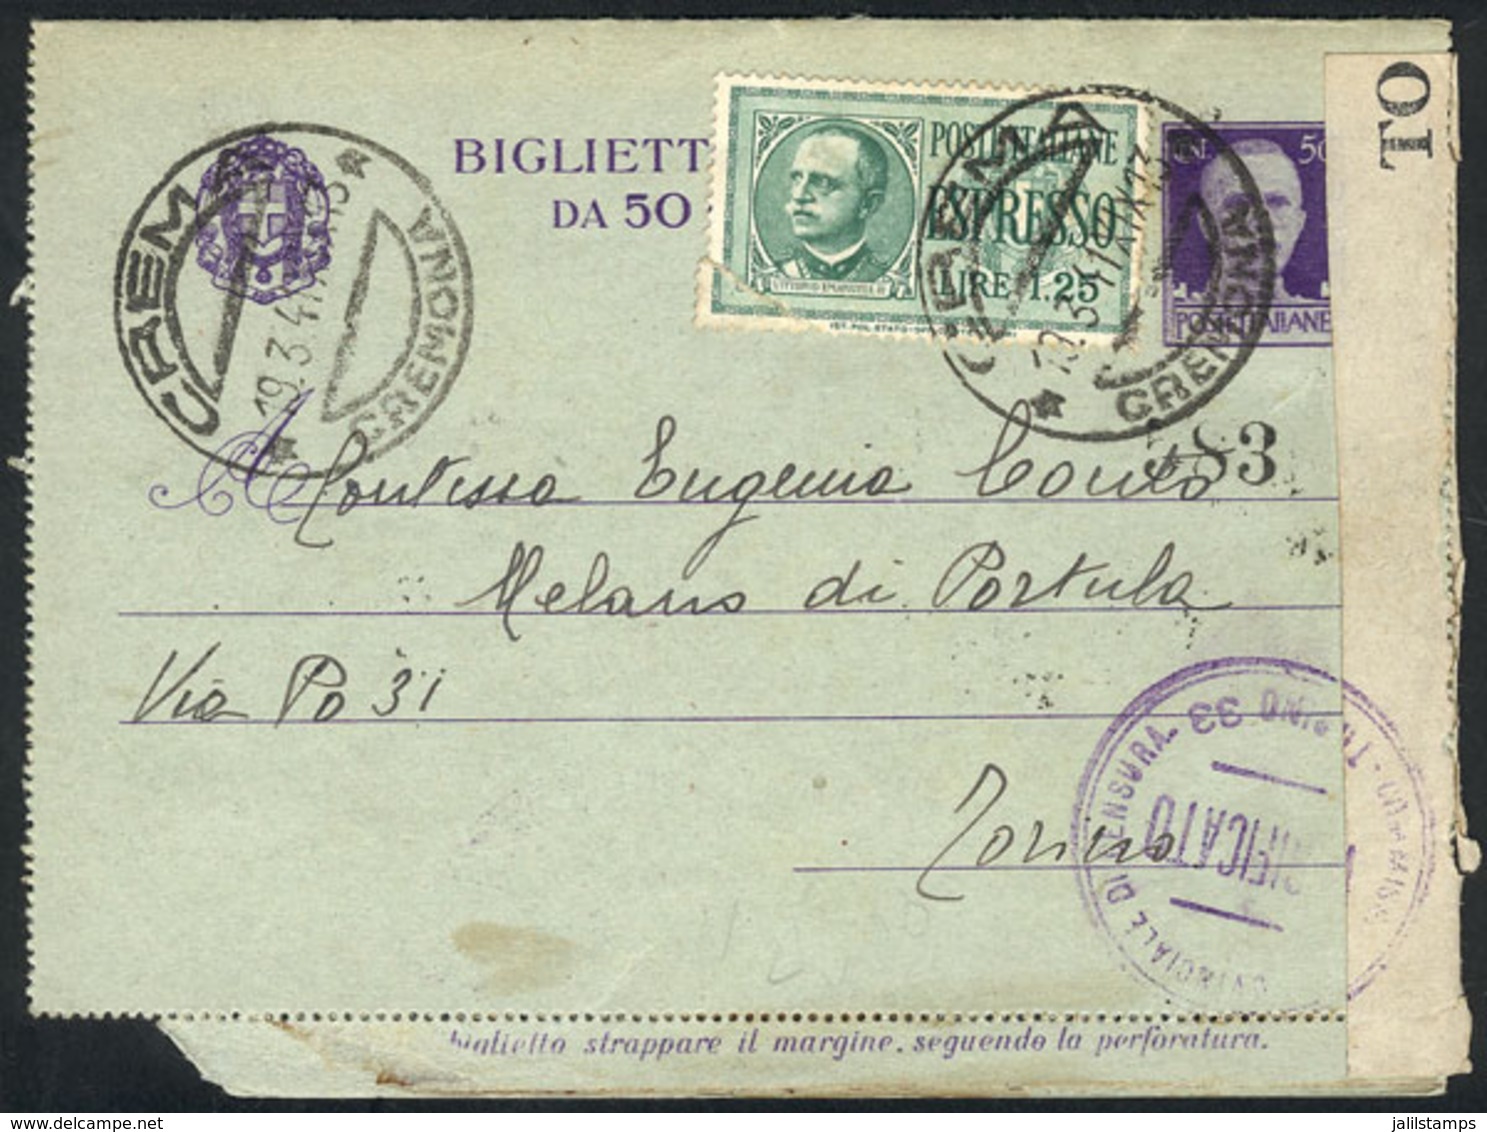 1477 ITALY: 50c. Letter Card (biglietto Postale) + Express Stamp Of 1.25L., Sent From Crema To Torino On 19/MAR/1941, Wi - Unclassified